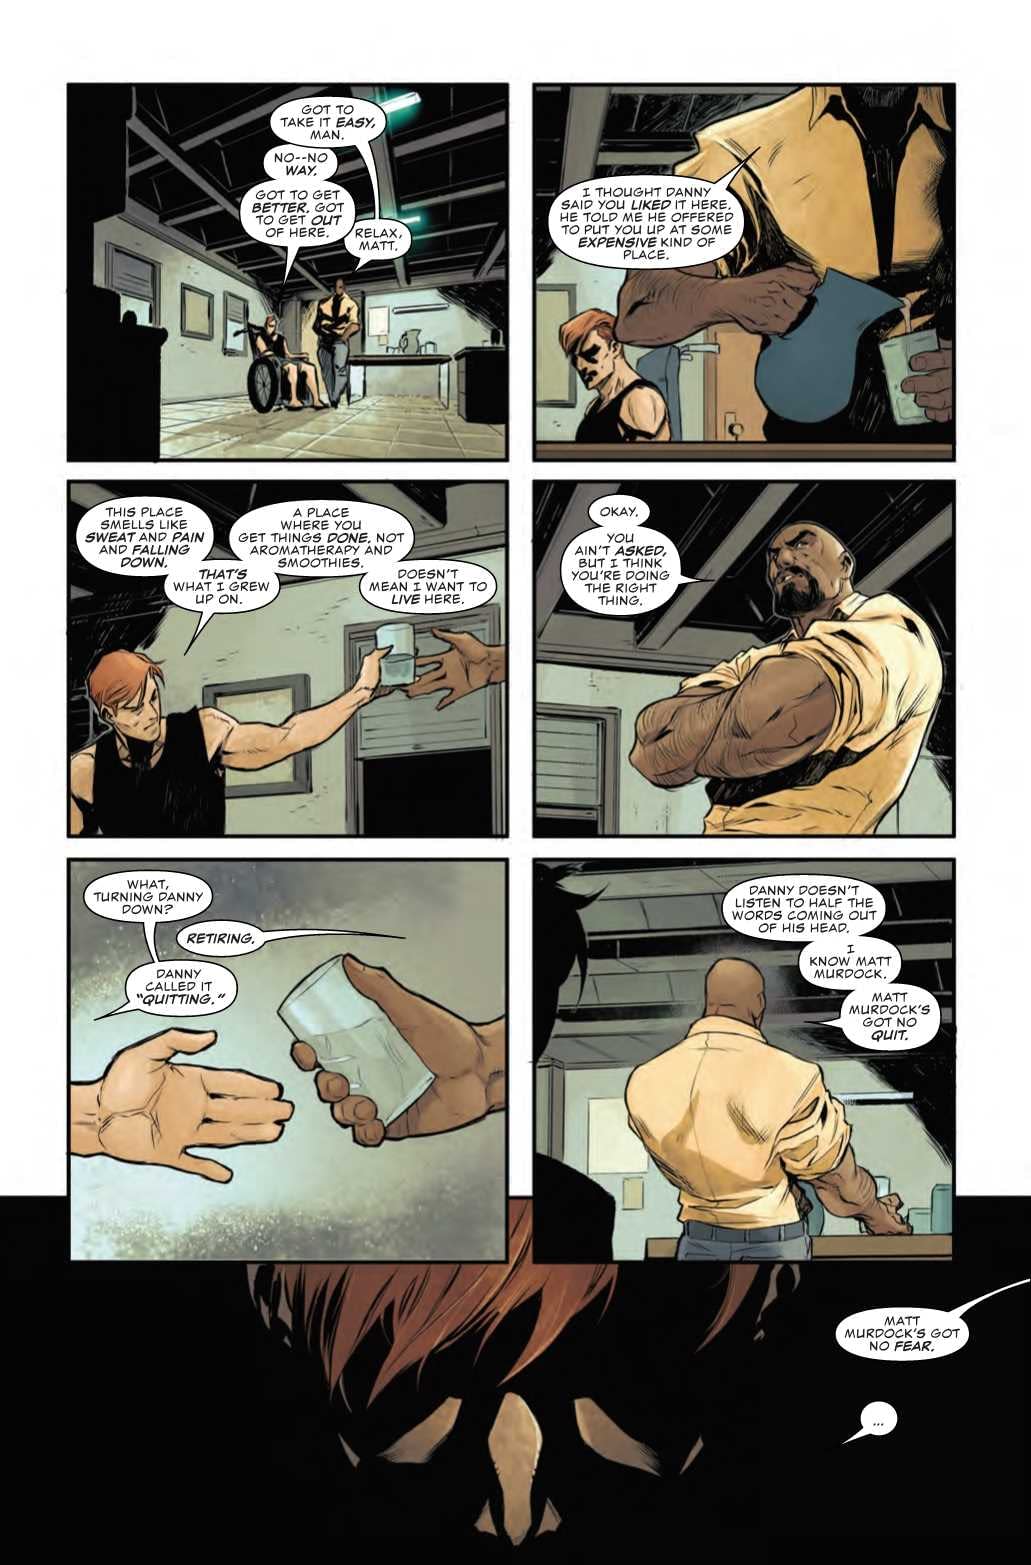 Iron Fist Advocates for Free Market Healthcare in Next Week's Man Without Fear #3